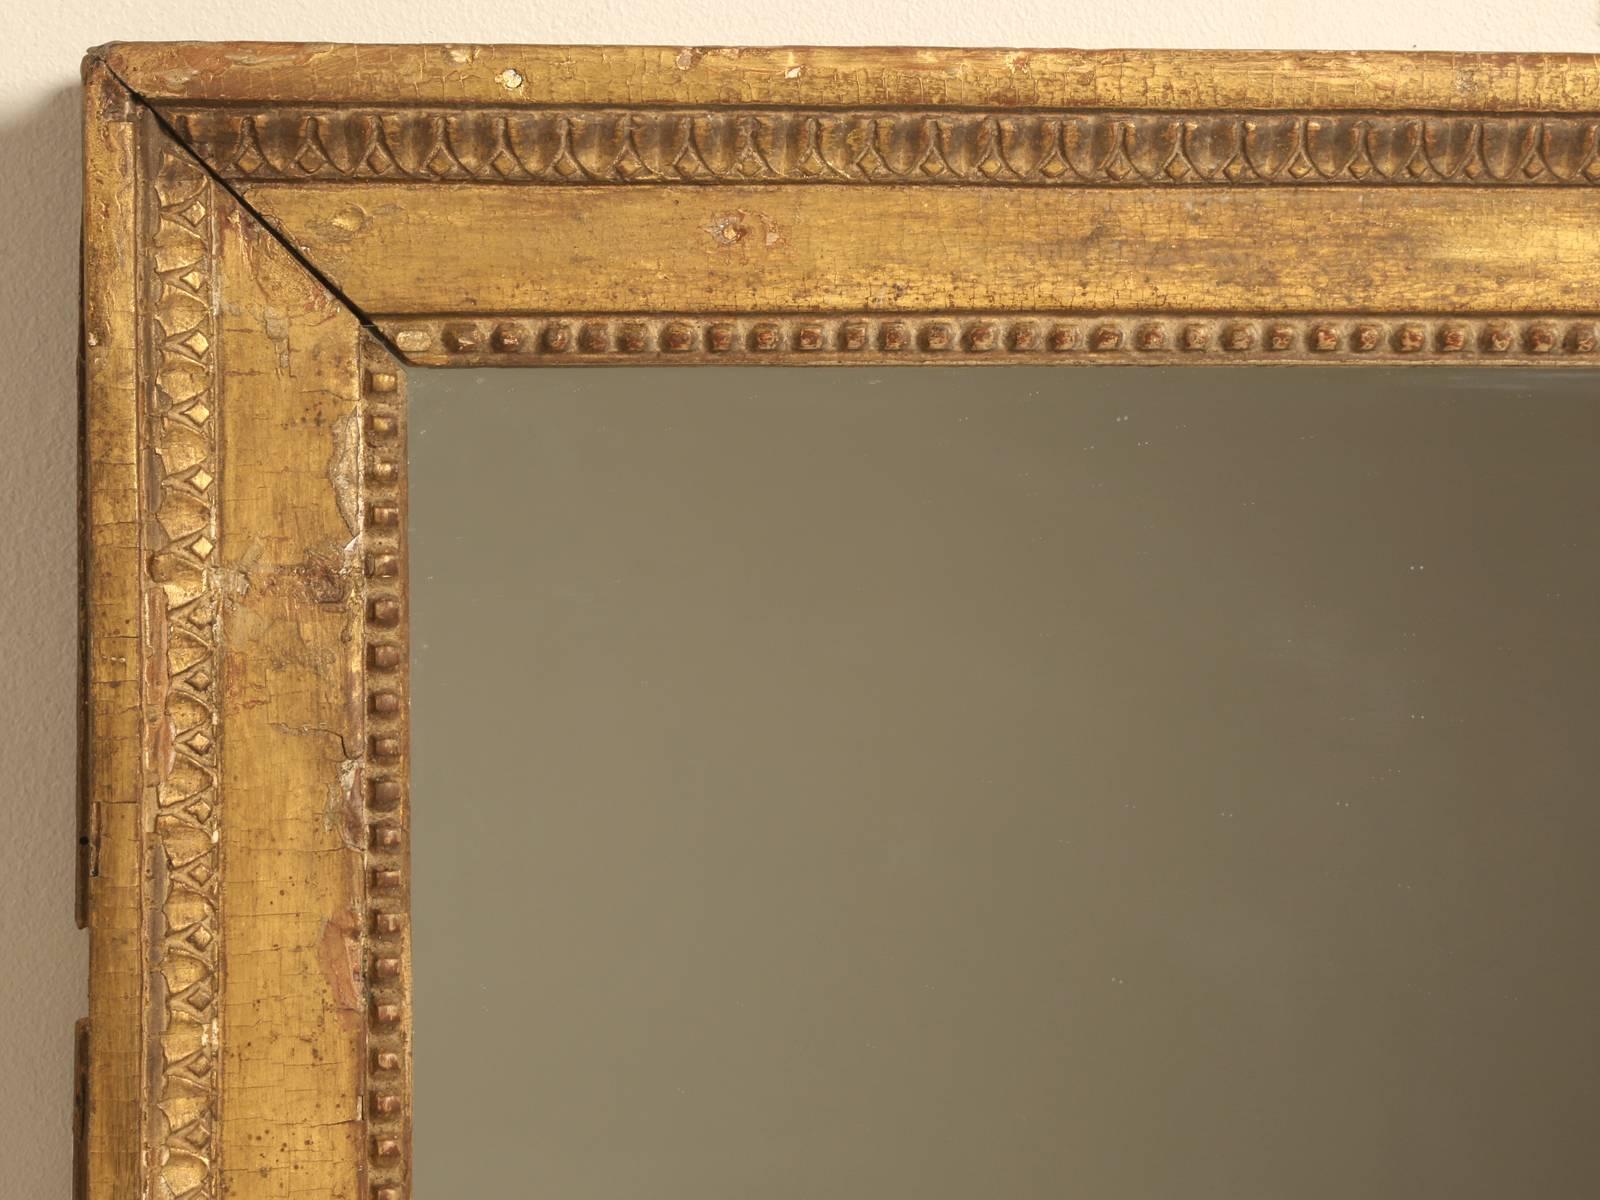 Described by the expert in France as; “Grand mirror in wood, doré, époque Louis XVI”. We found this beautiful, unrestored Louis XVI mirror in the town of Lyon, famous for its incredible restaurants and beauty. The glass portion of this Louis XVI